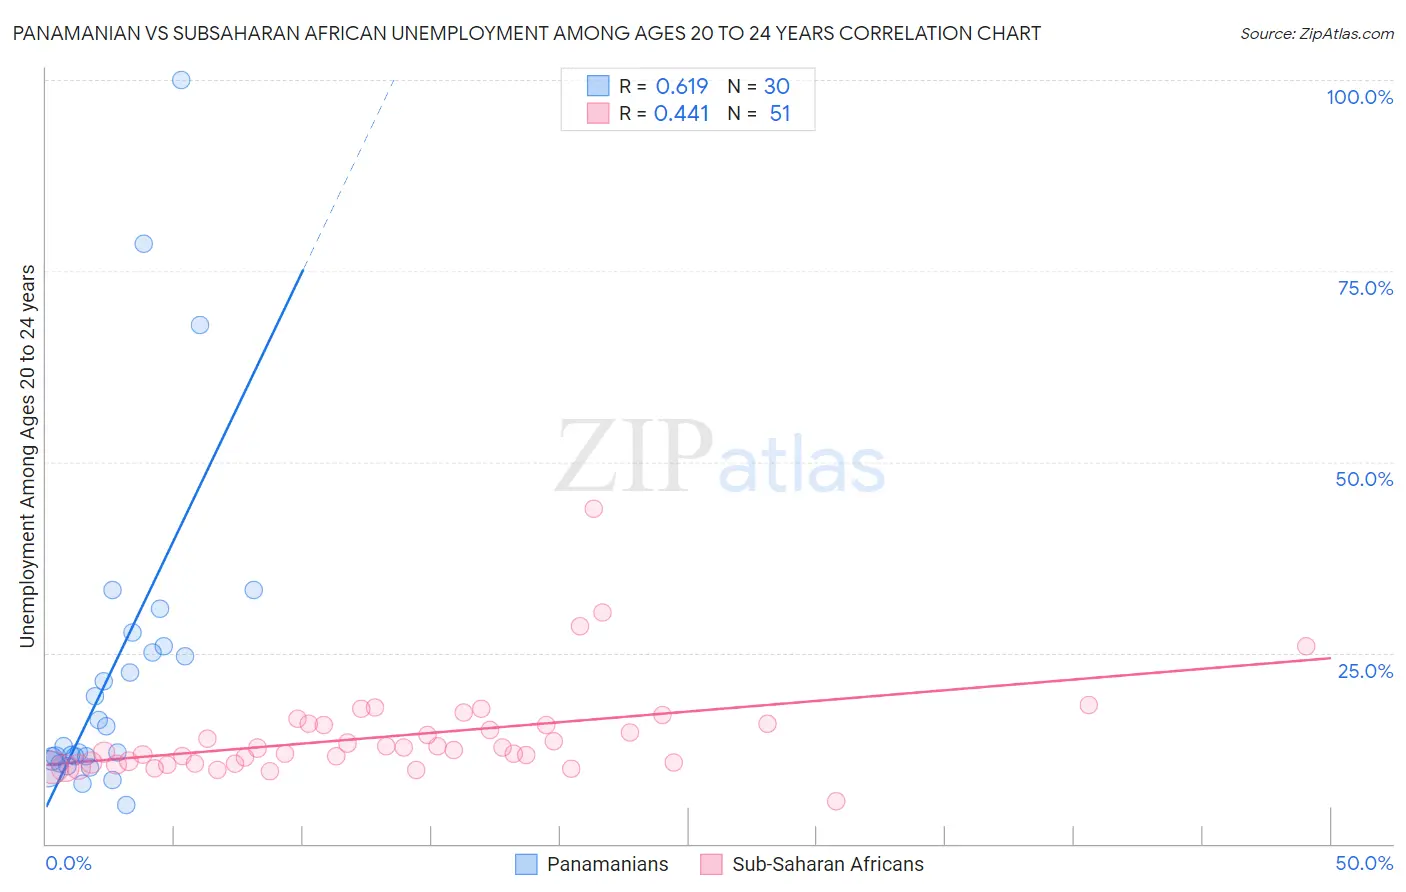 Panamanian vs Subsaharan African Unemployment Among Ages 20 to 24 years